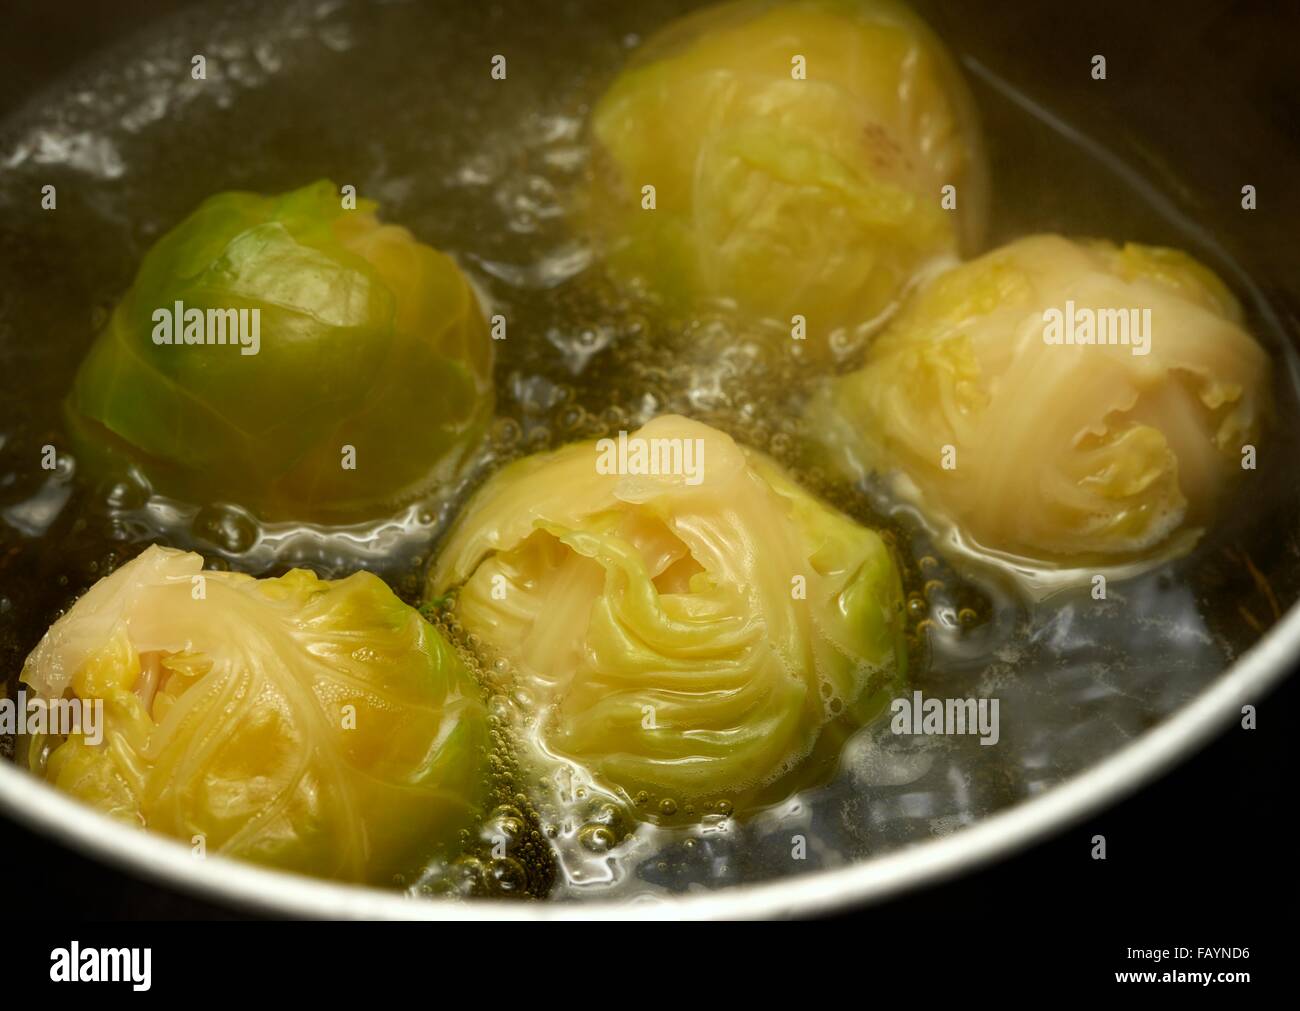 Brussel sprouts boiling in a pan of water Stock Photo